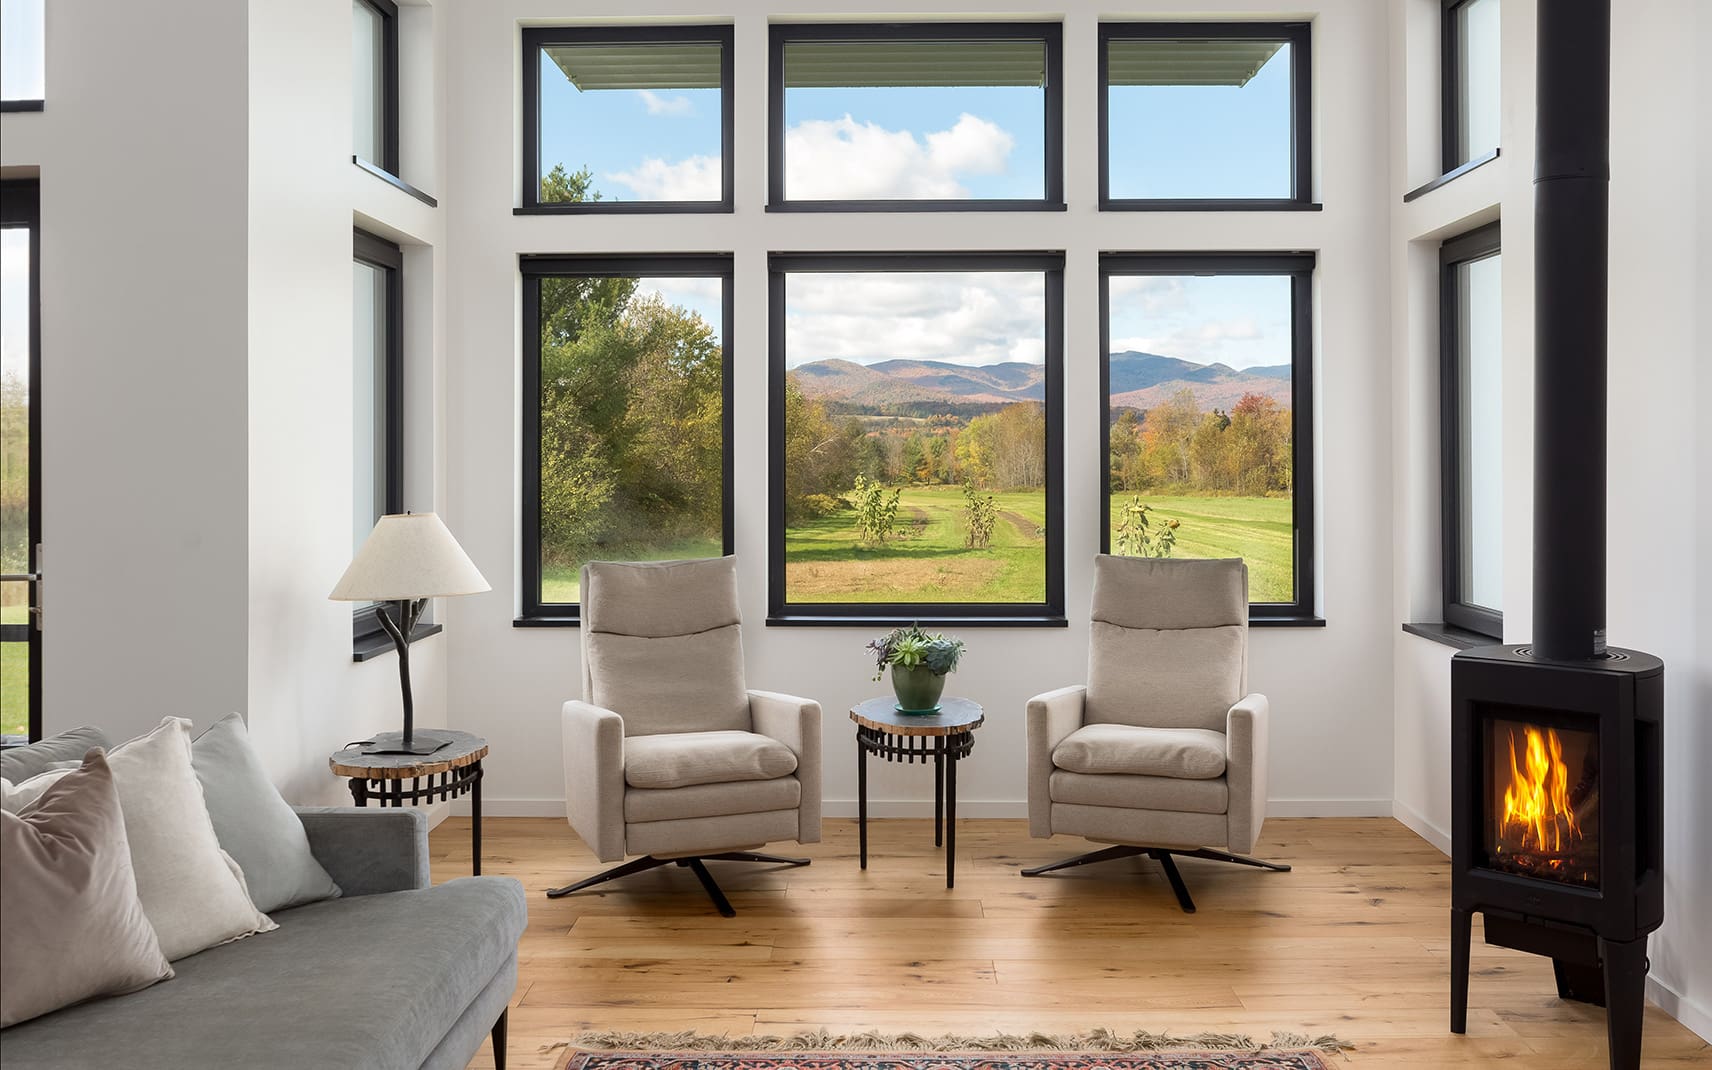 Seating space with a view through the windows in a Unity Zum